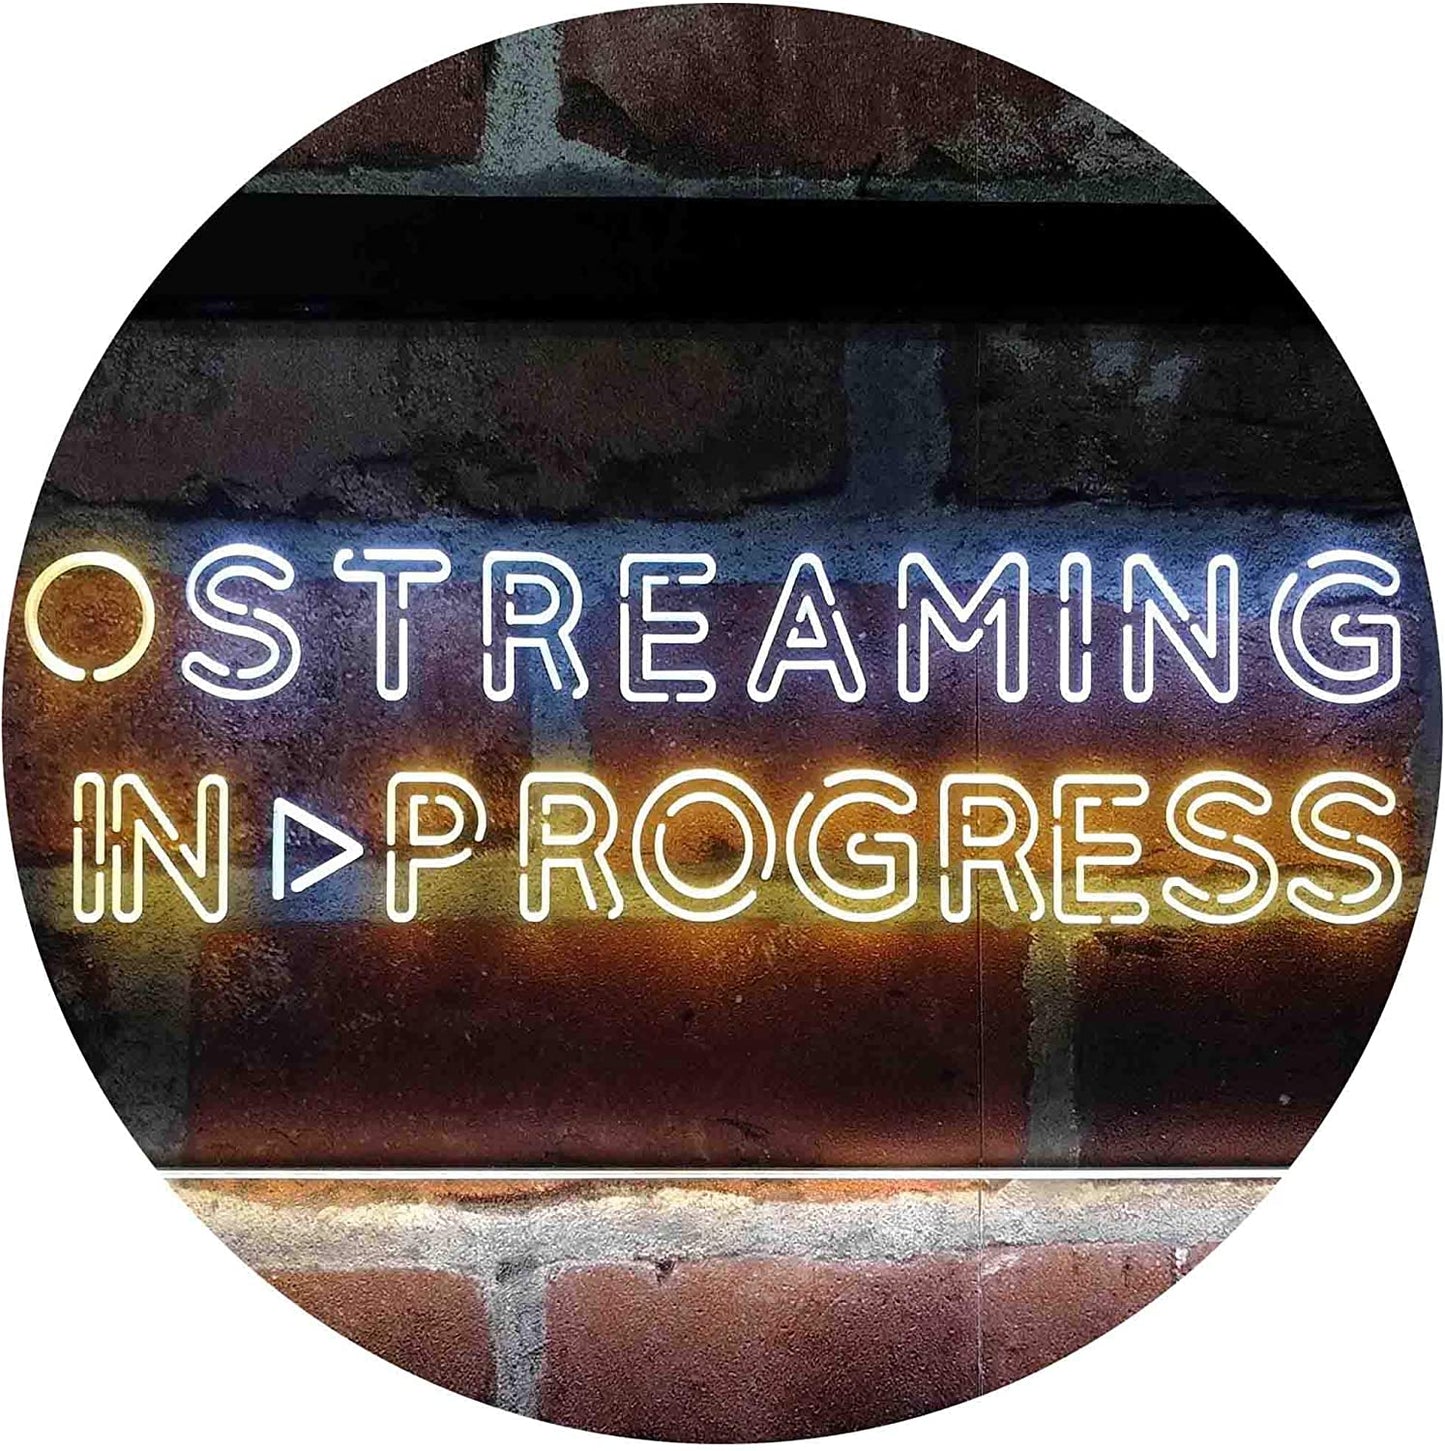 Streaming in Progress Display LED Neon Light Sign - Way Up Gifts